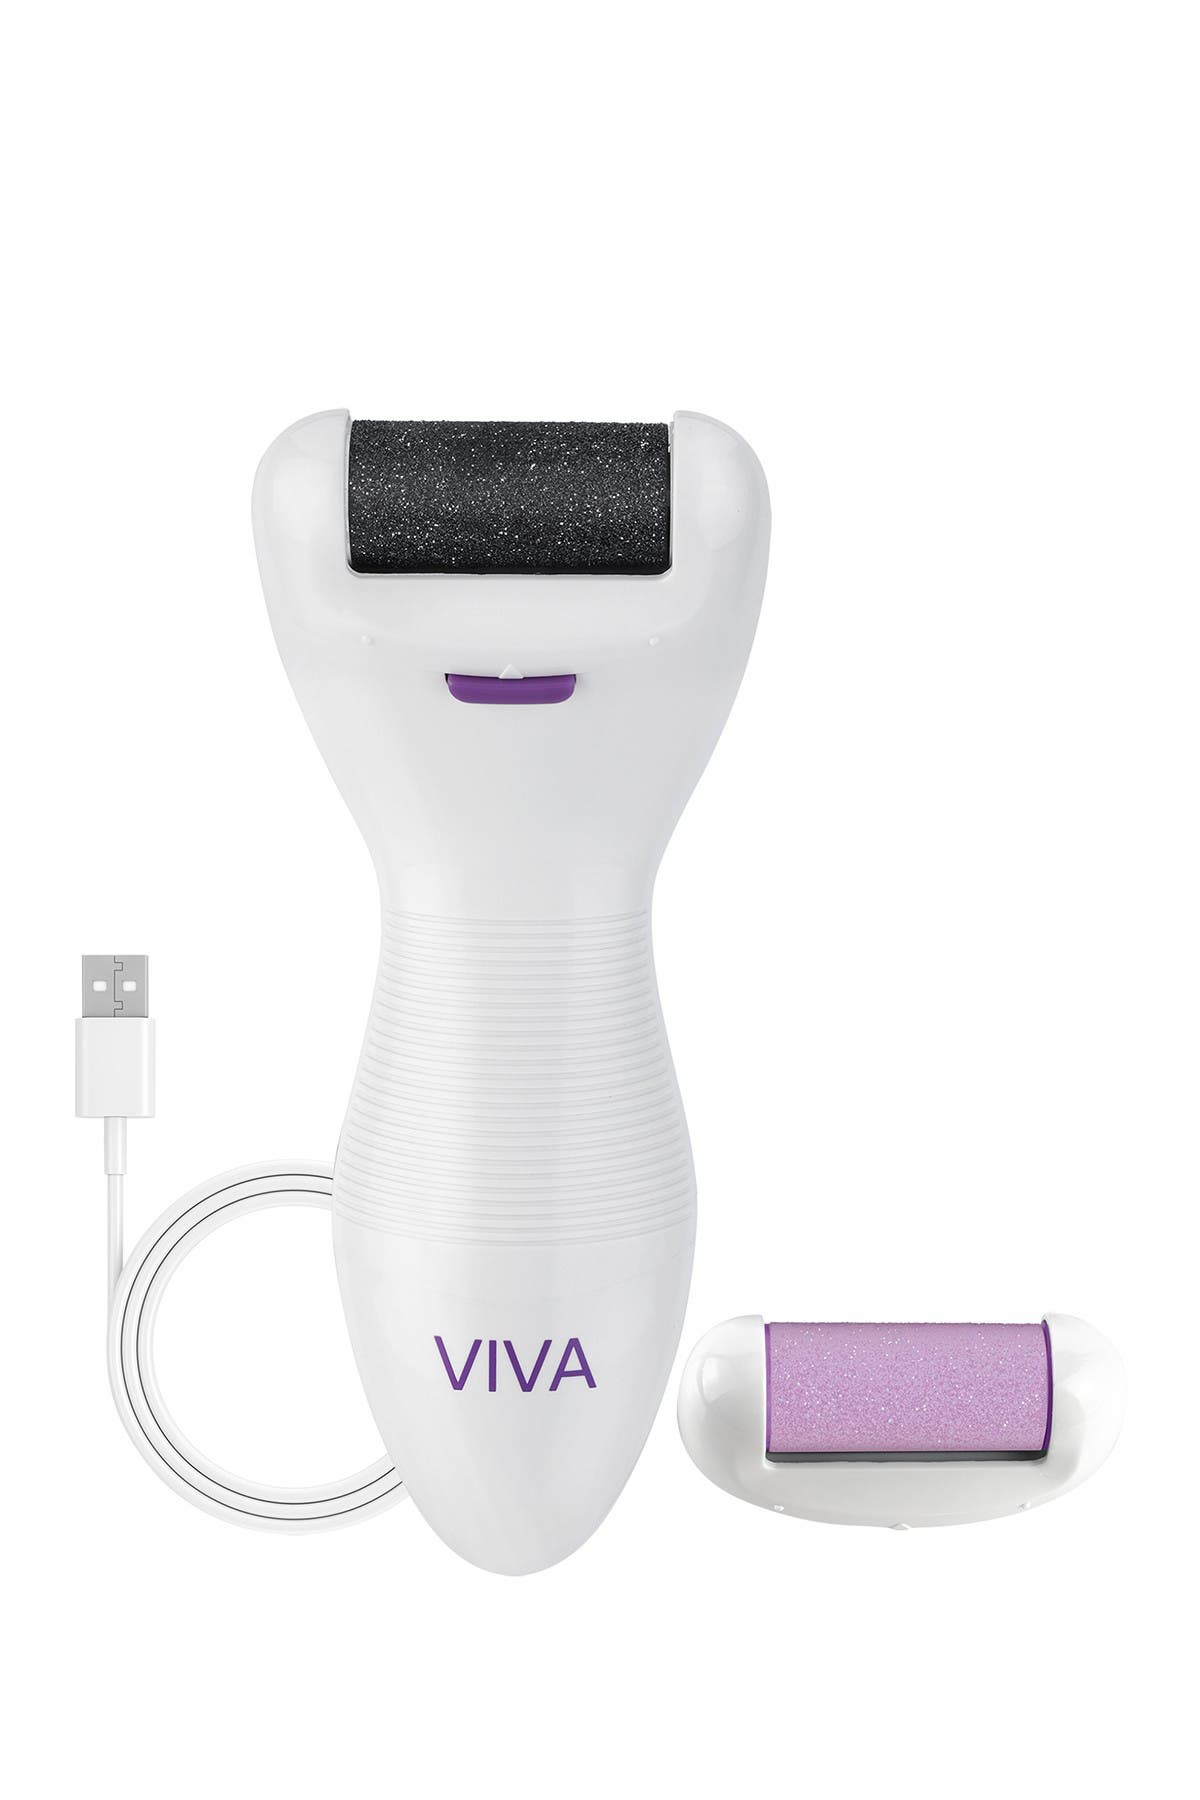 Michael Todd Beauty White Viva Advanced Pedicure Foot Smoothing System